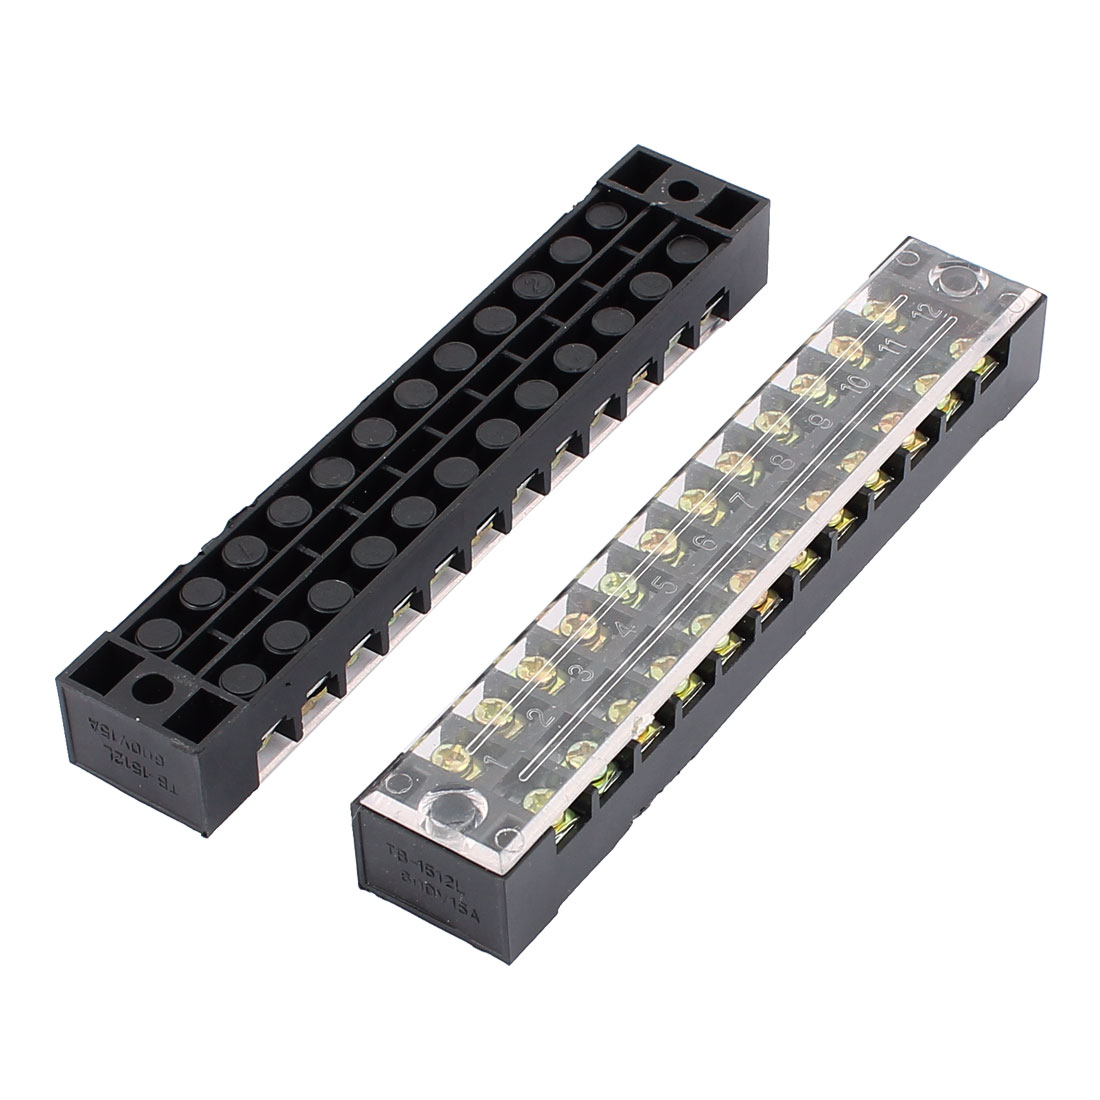 10 Pcs 600V 15A 12P Screw Electrical Barrier Terminal Block Cable Connector Bar - image 2 of 5